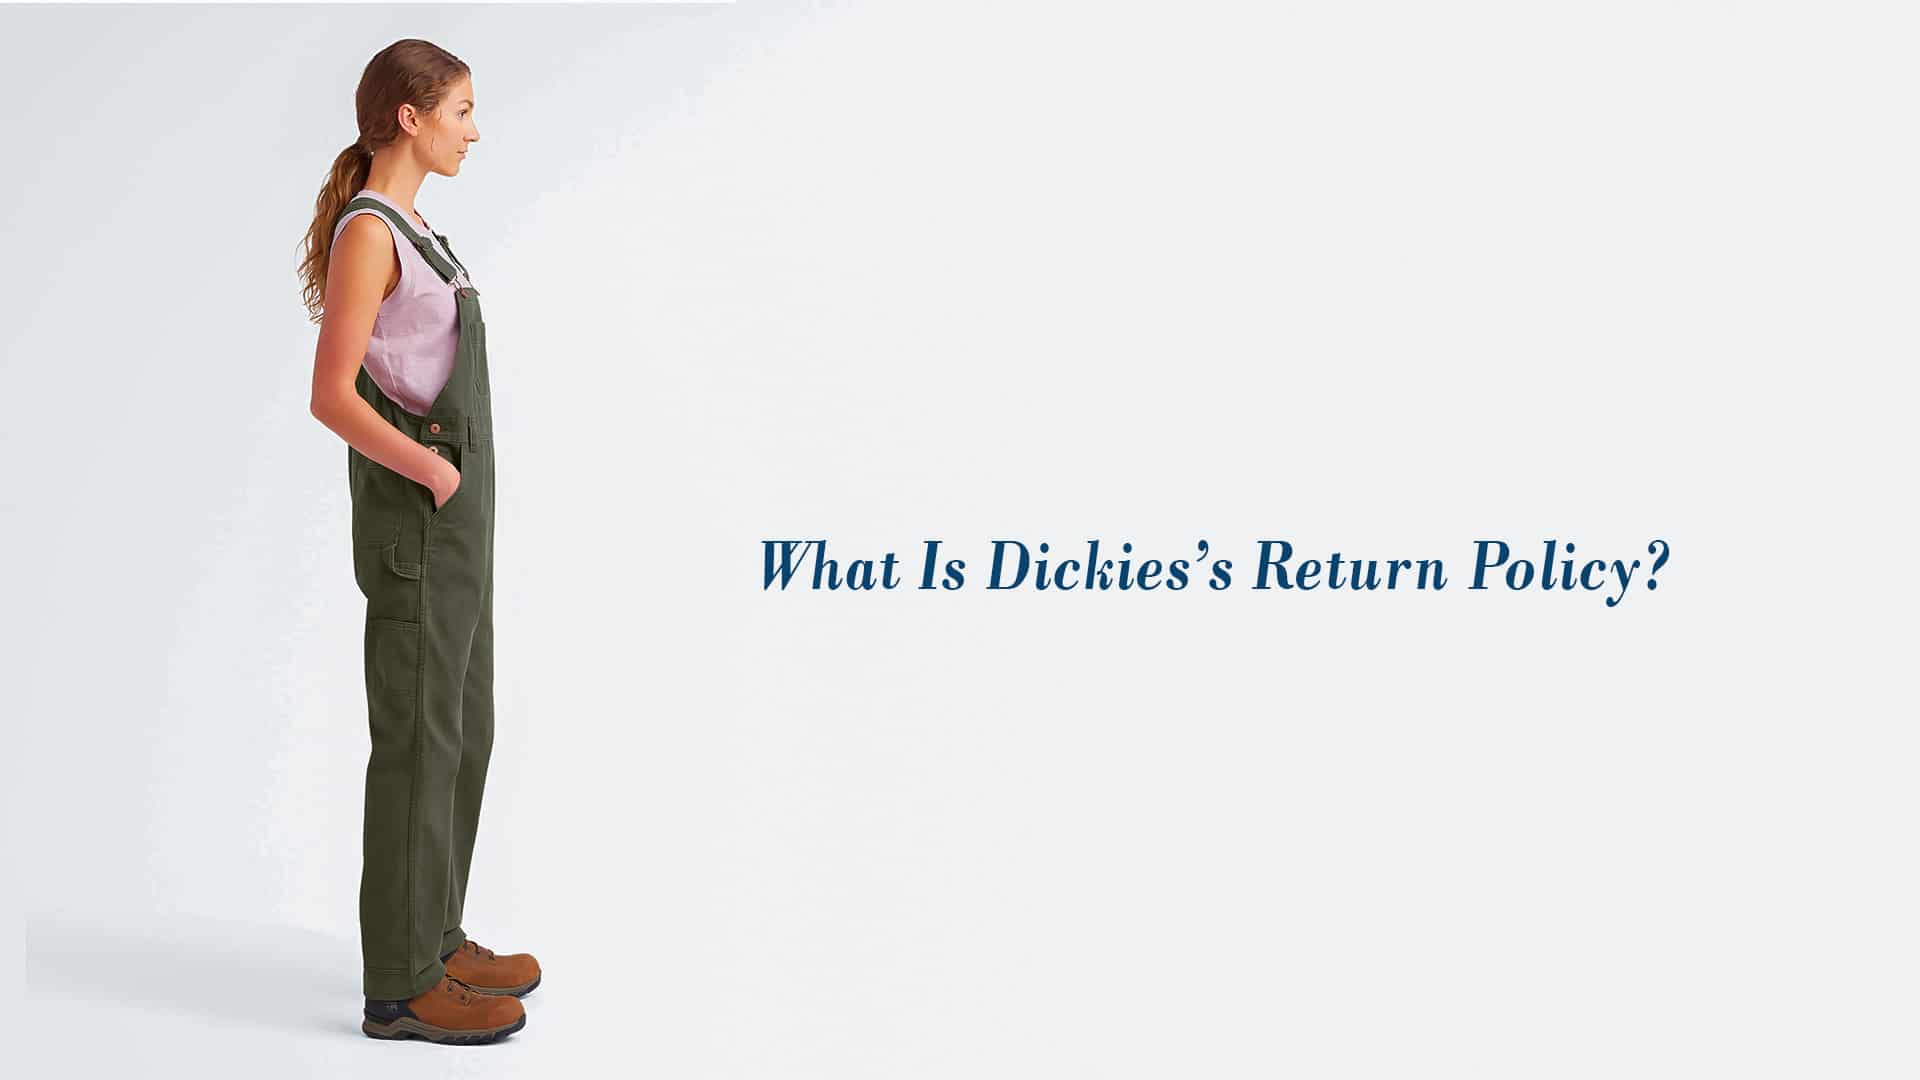 What is Dickies’s Return Policy